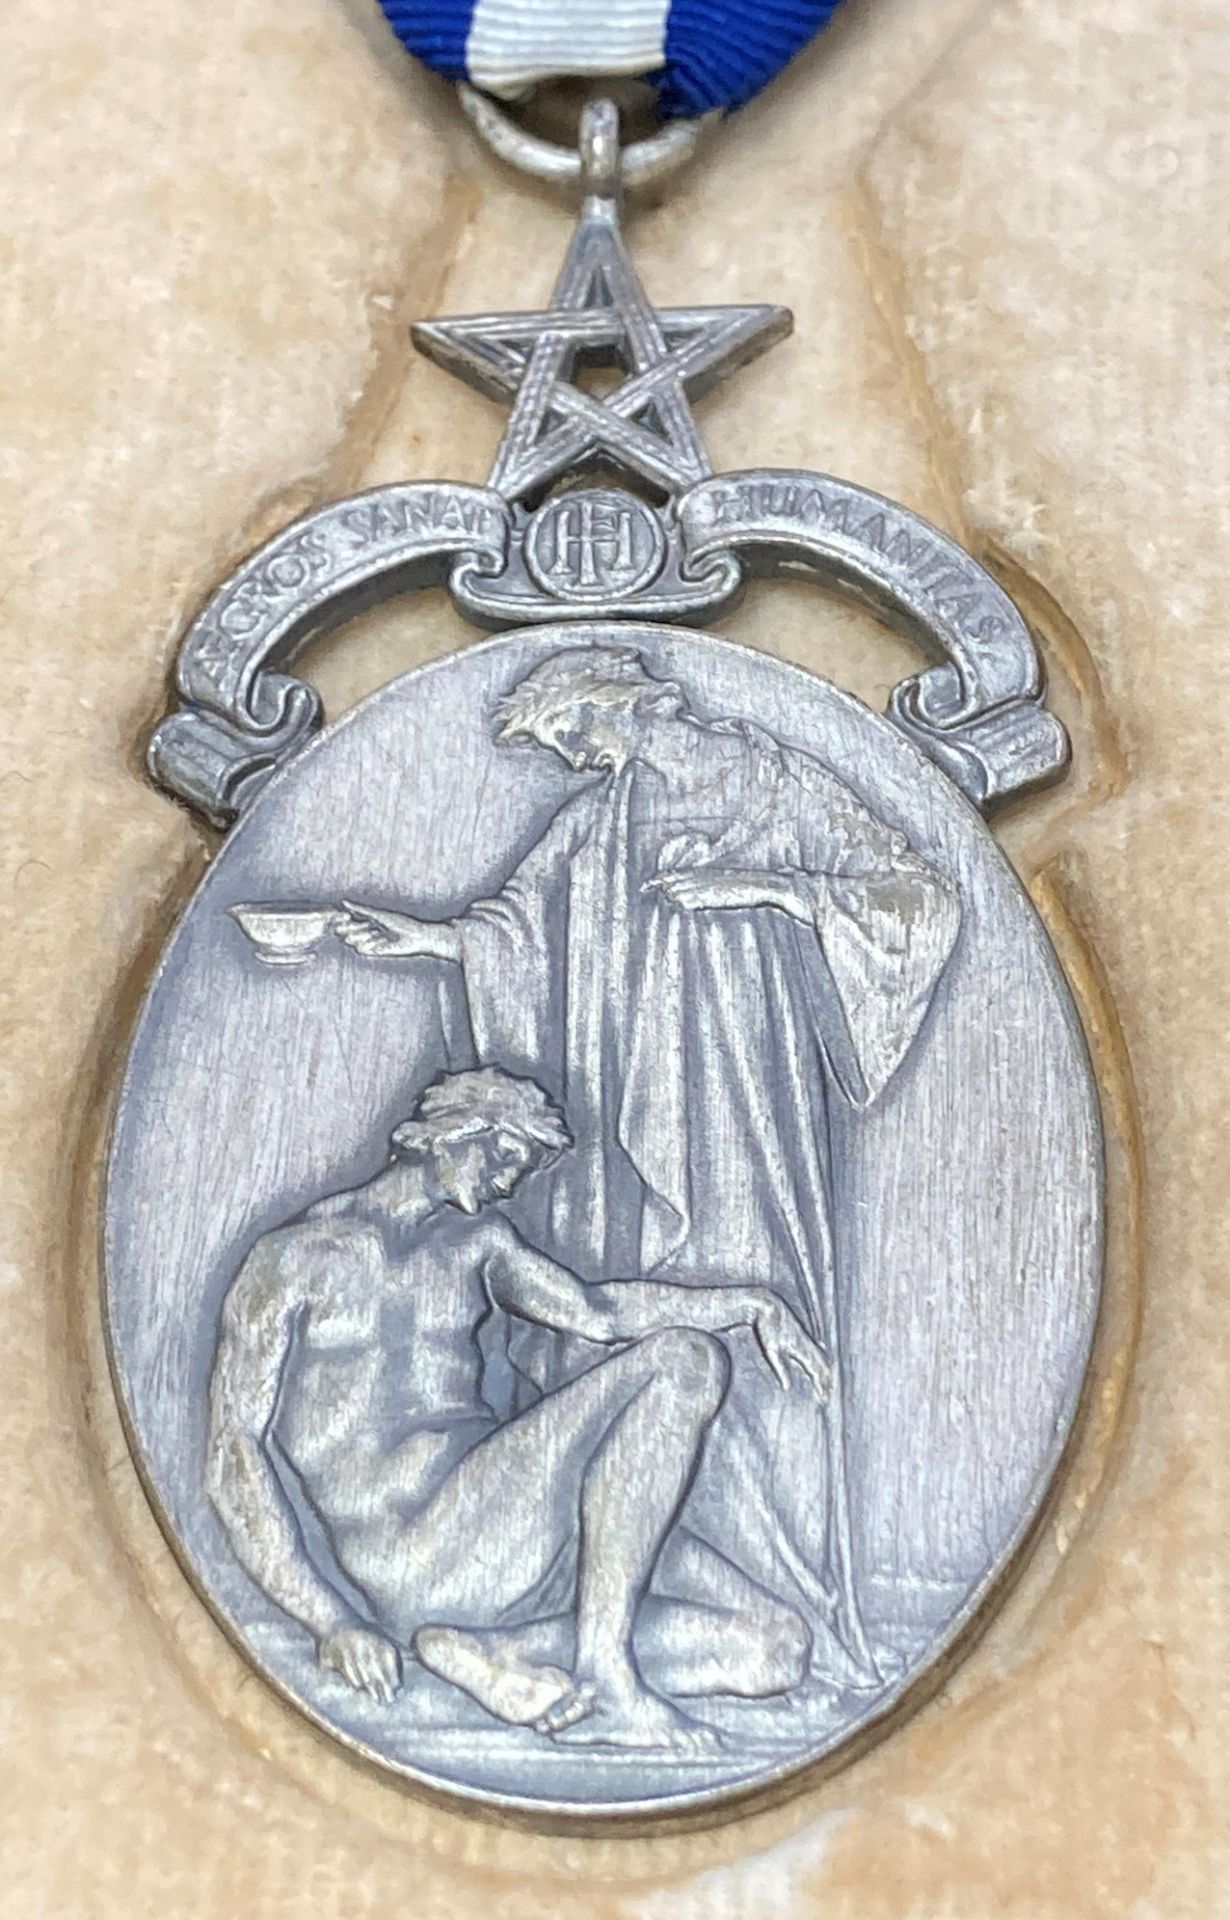 Masonic jewel in named fitted box of issue named to W. Bro. F.A.T. Young, no. - Image 2 of 4